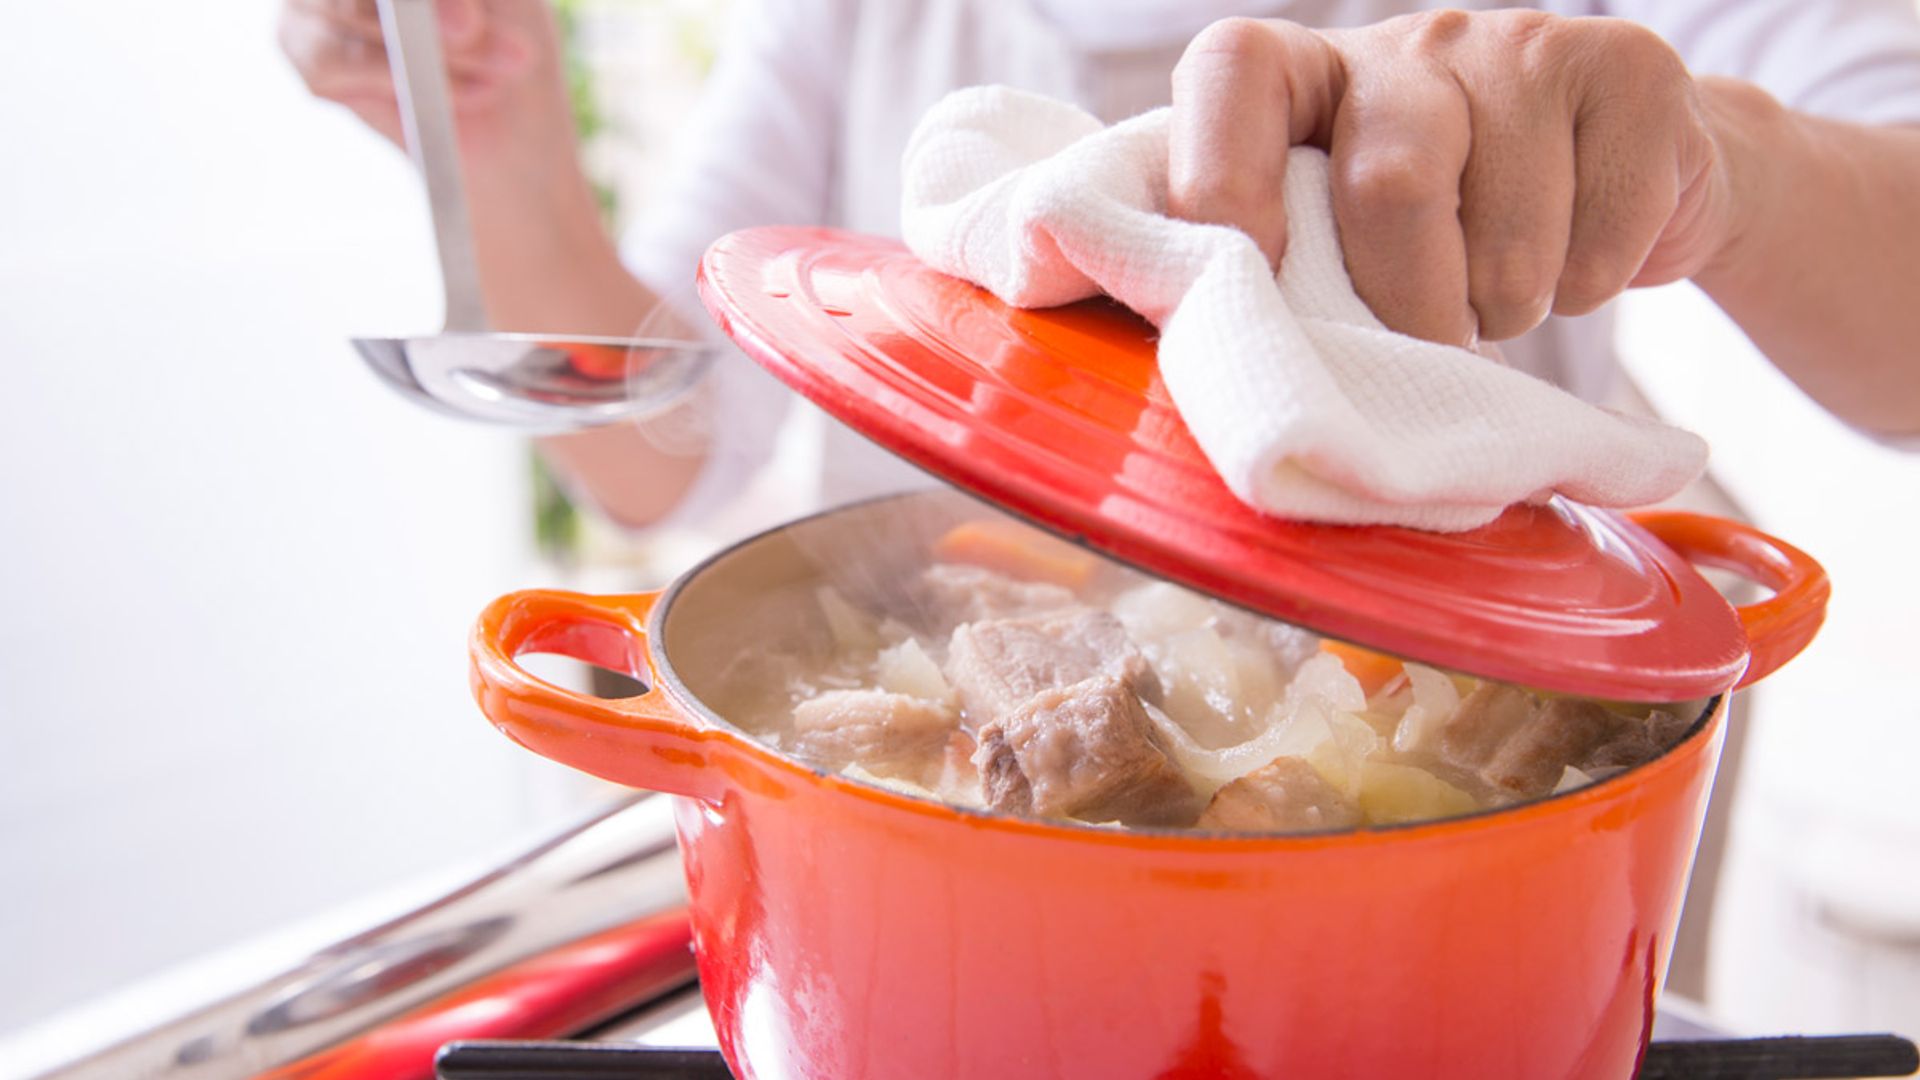 Lidl's pastel cookware could be mistaken for Le Creuset – and it starts at £3.99